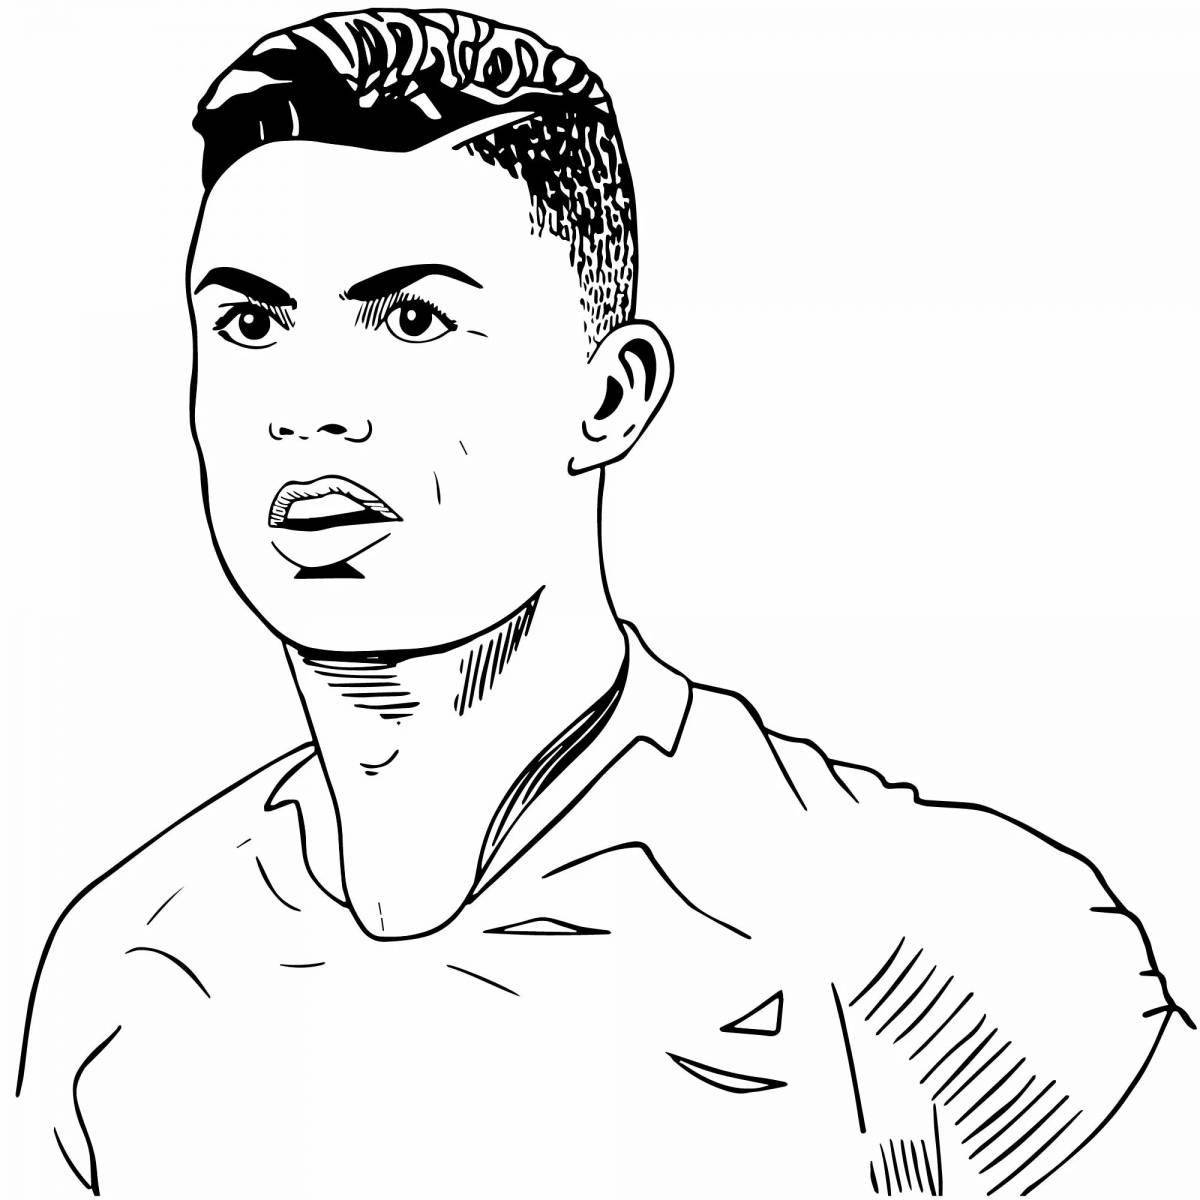 Coloring page live soccer player ronaldo